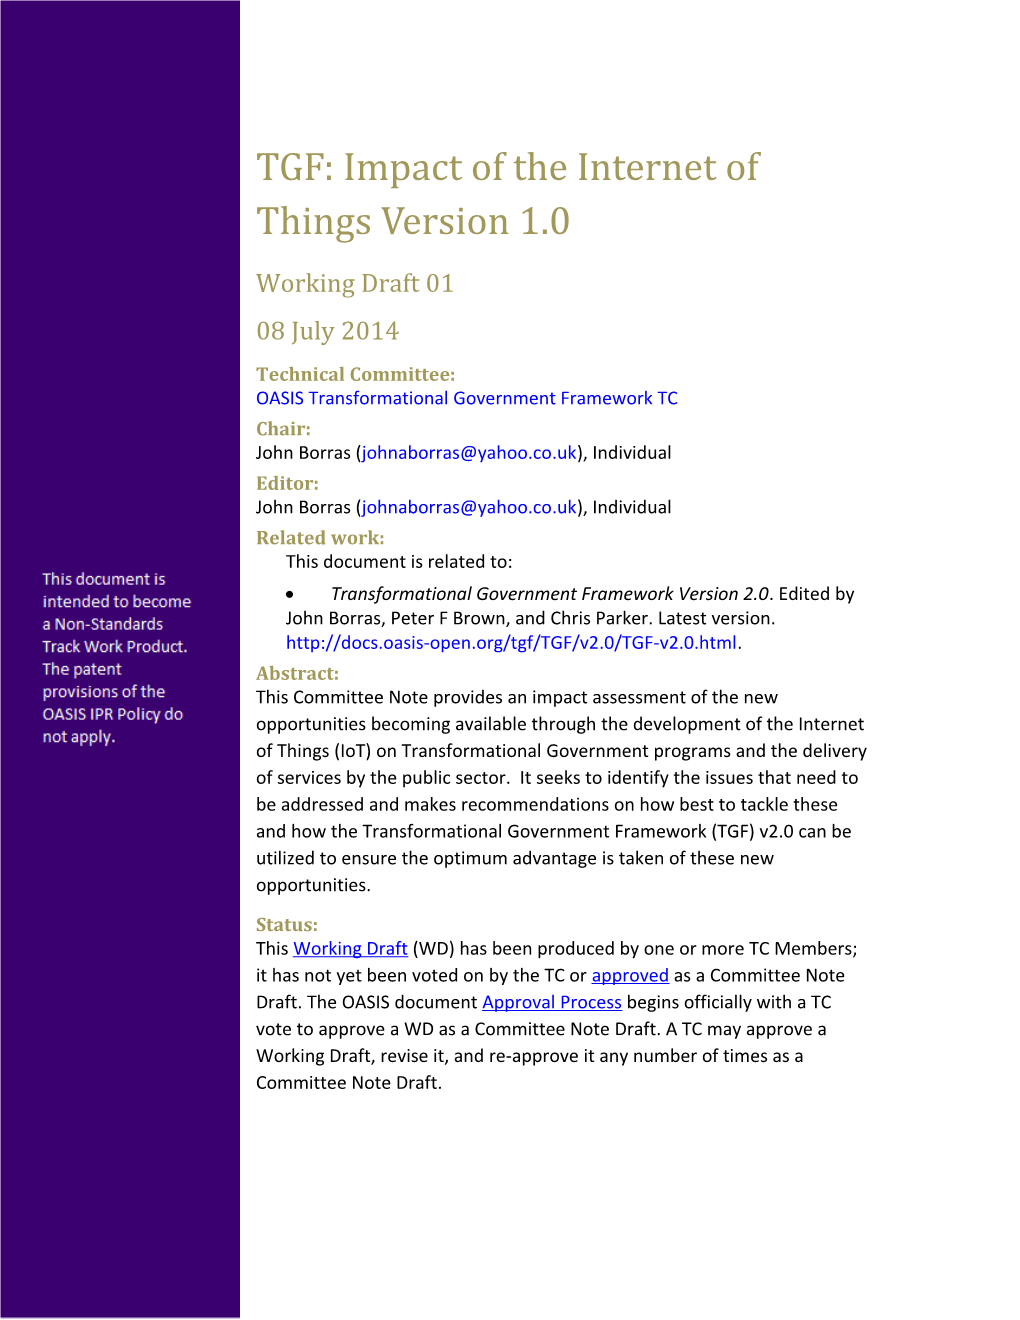 TGF: Impact of the Internet of Things Version 1.0